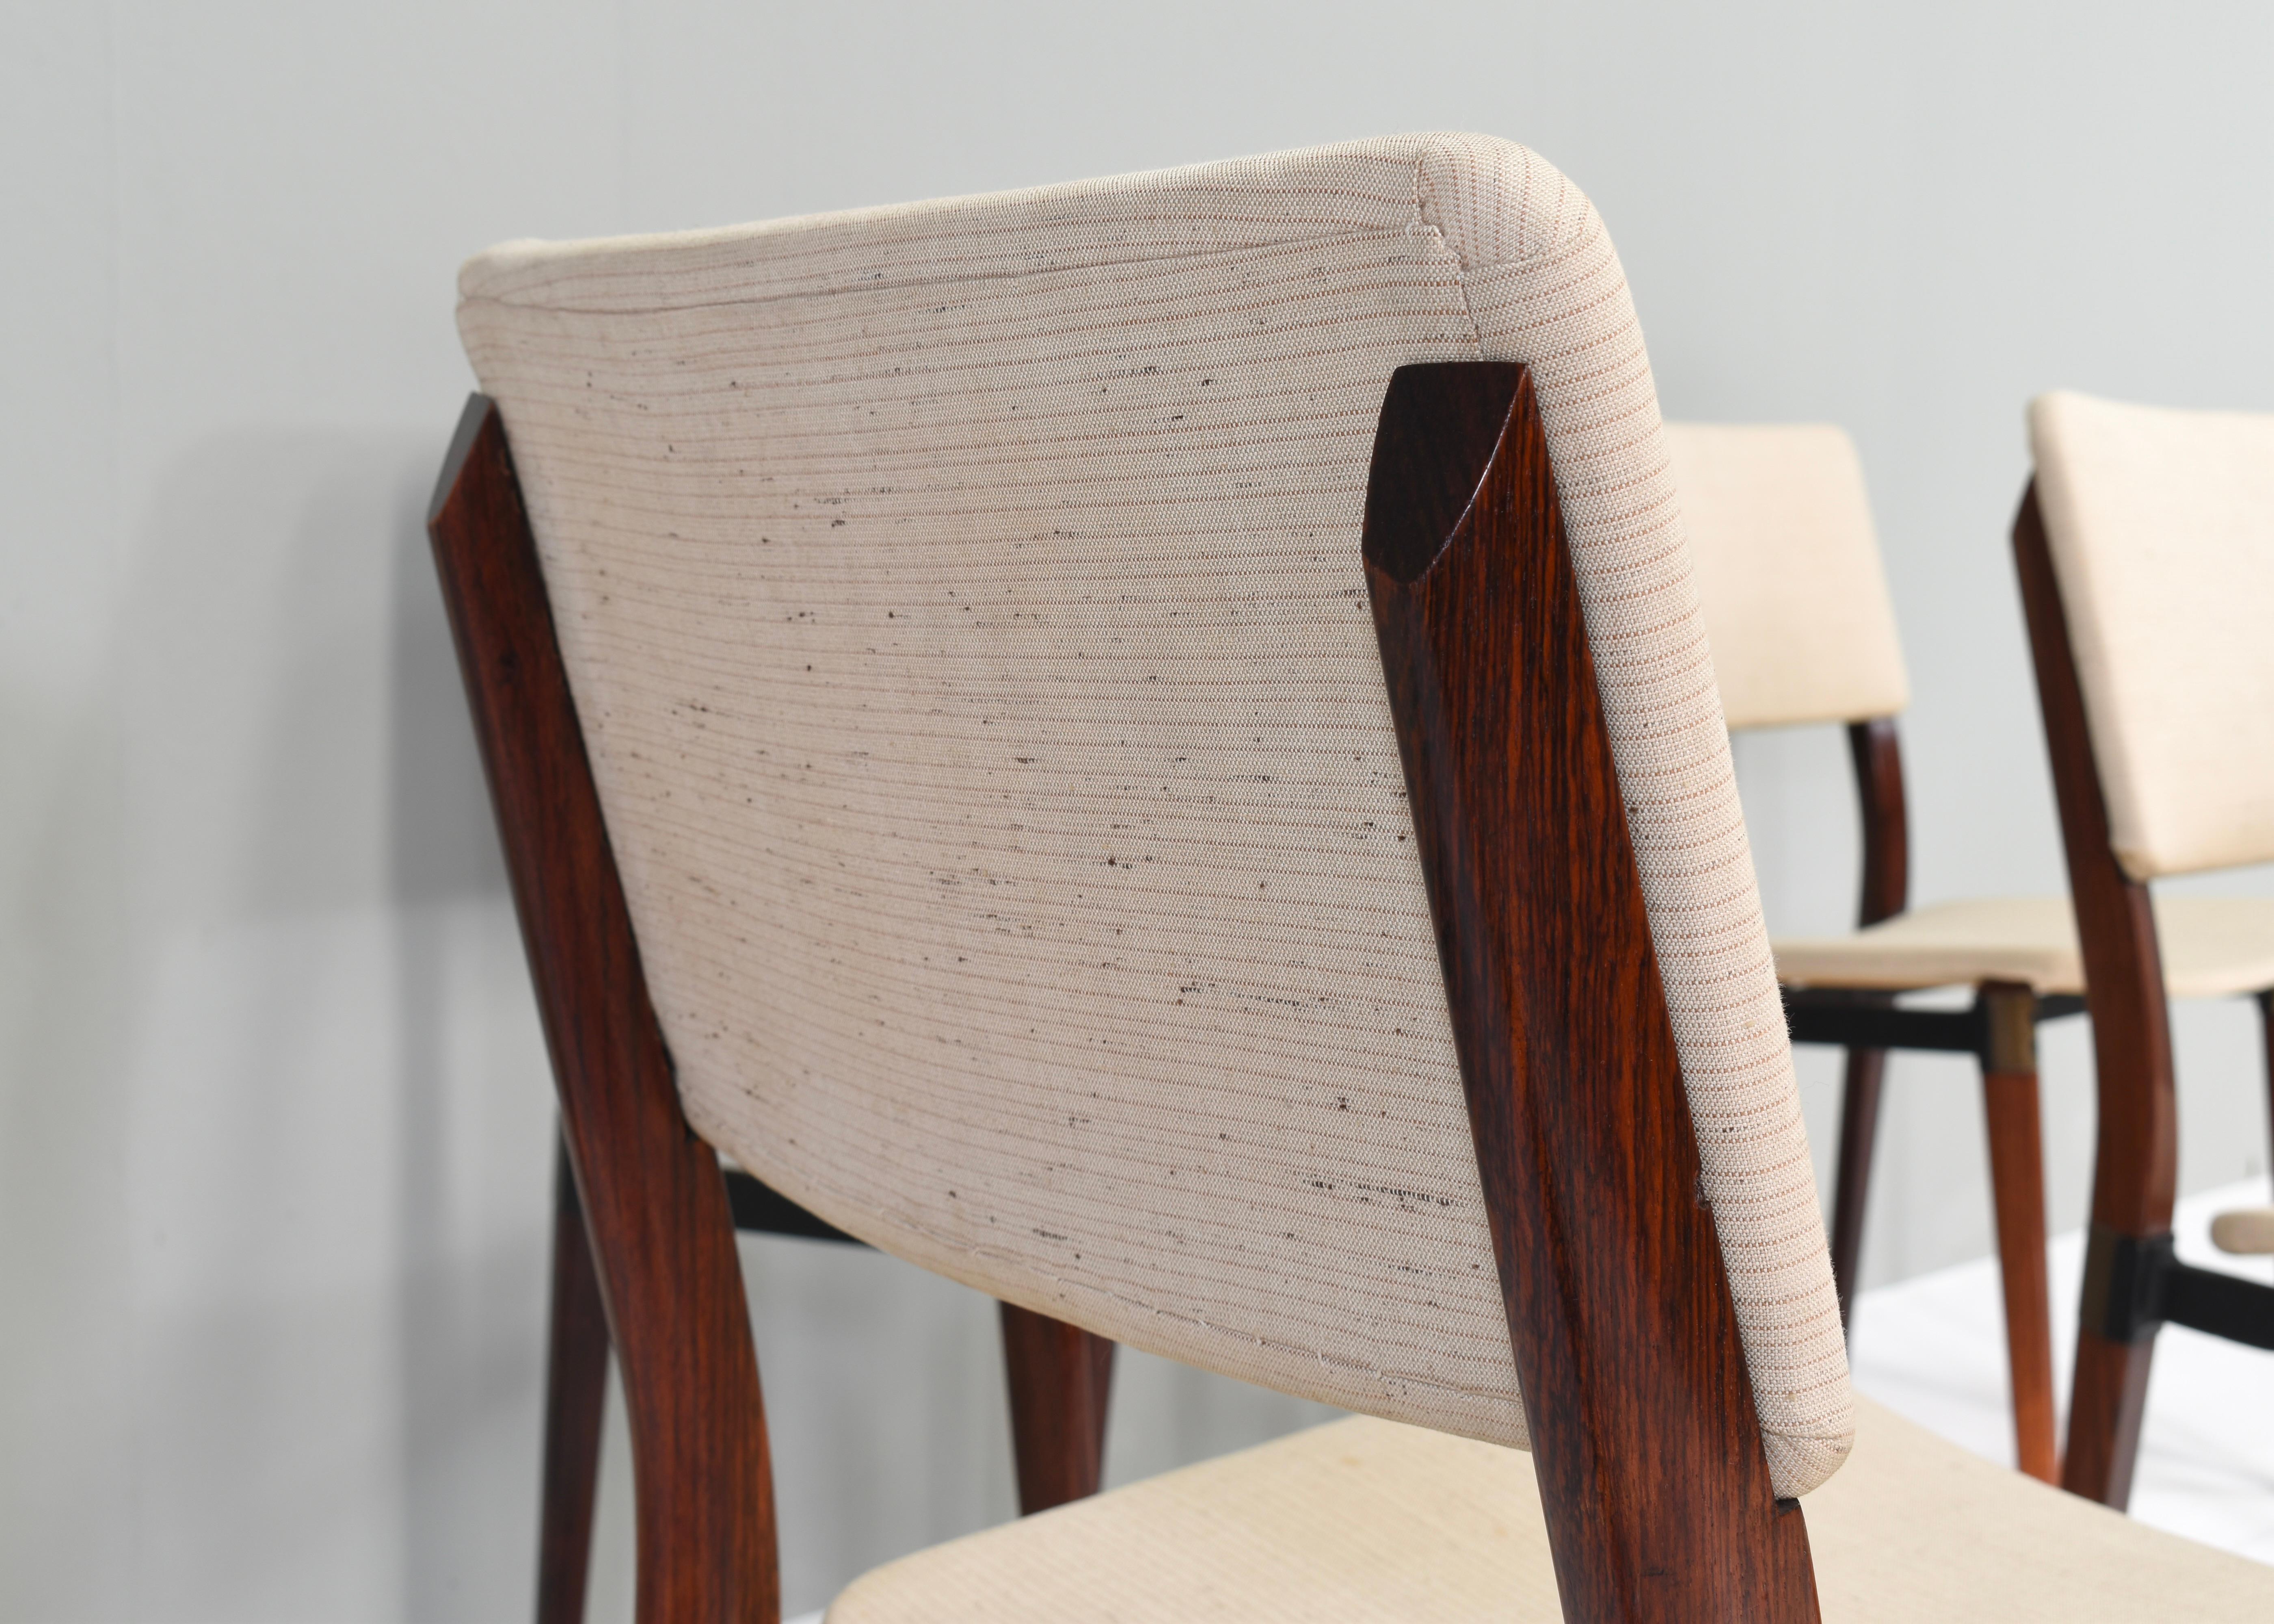 Eugenio Gerli S82 Dining Chairs Set of Six by Tecno, Italy, circa 1960 For Sale 4